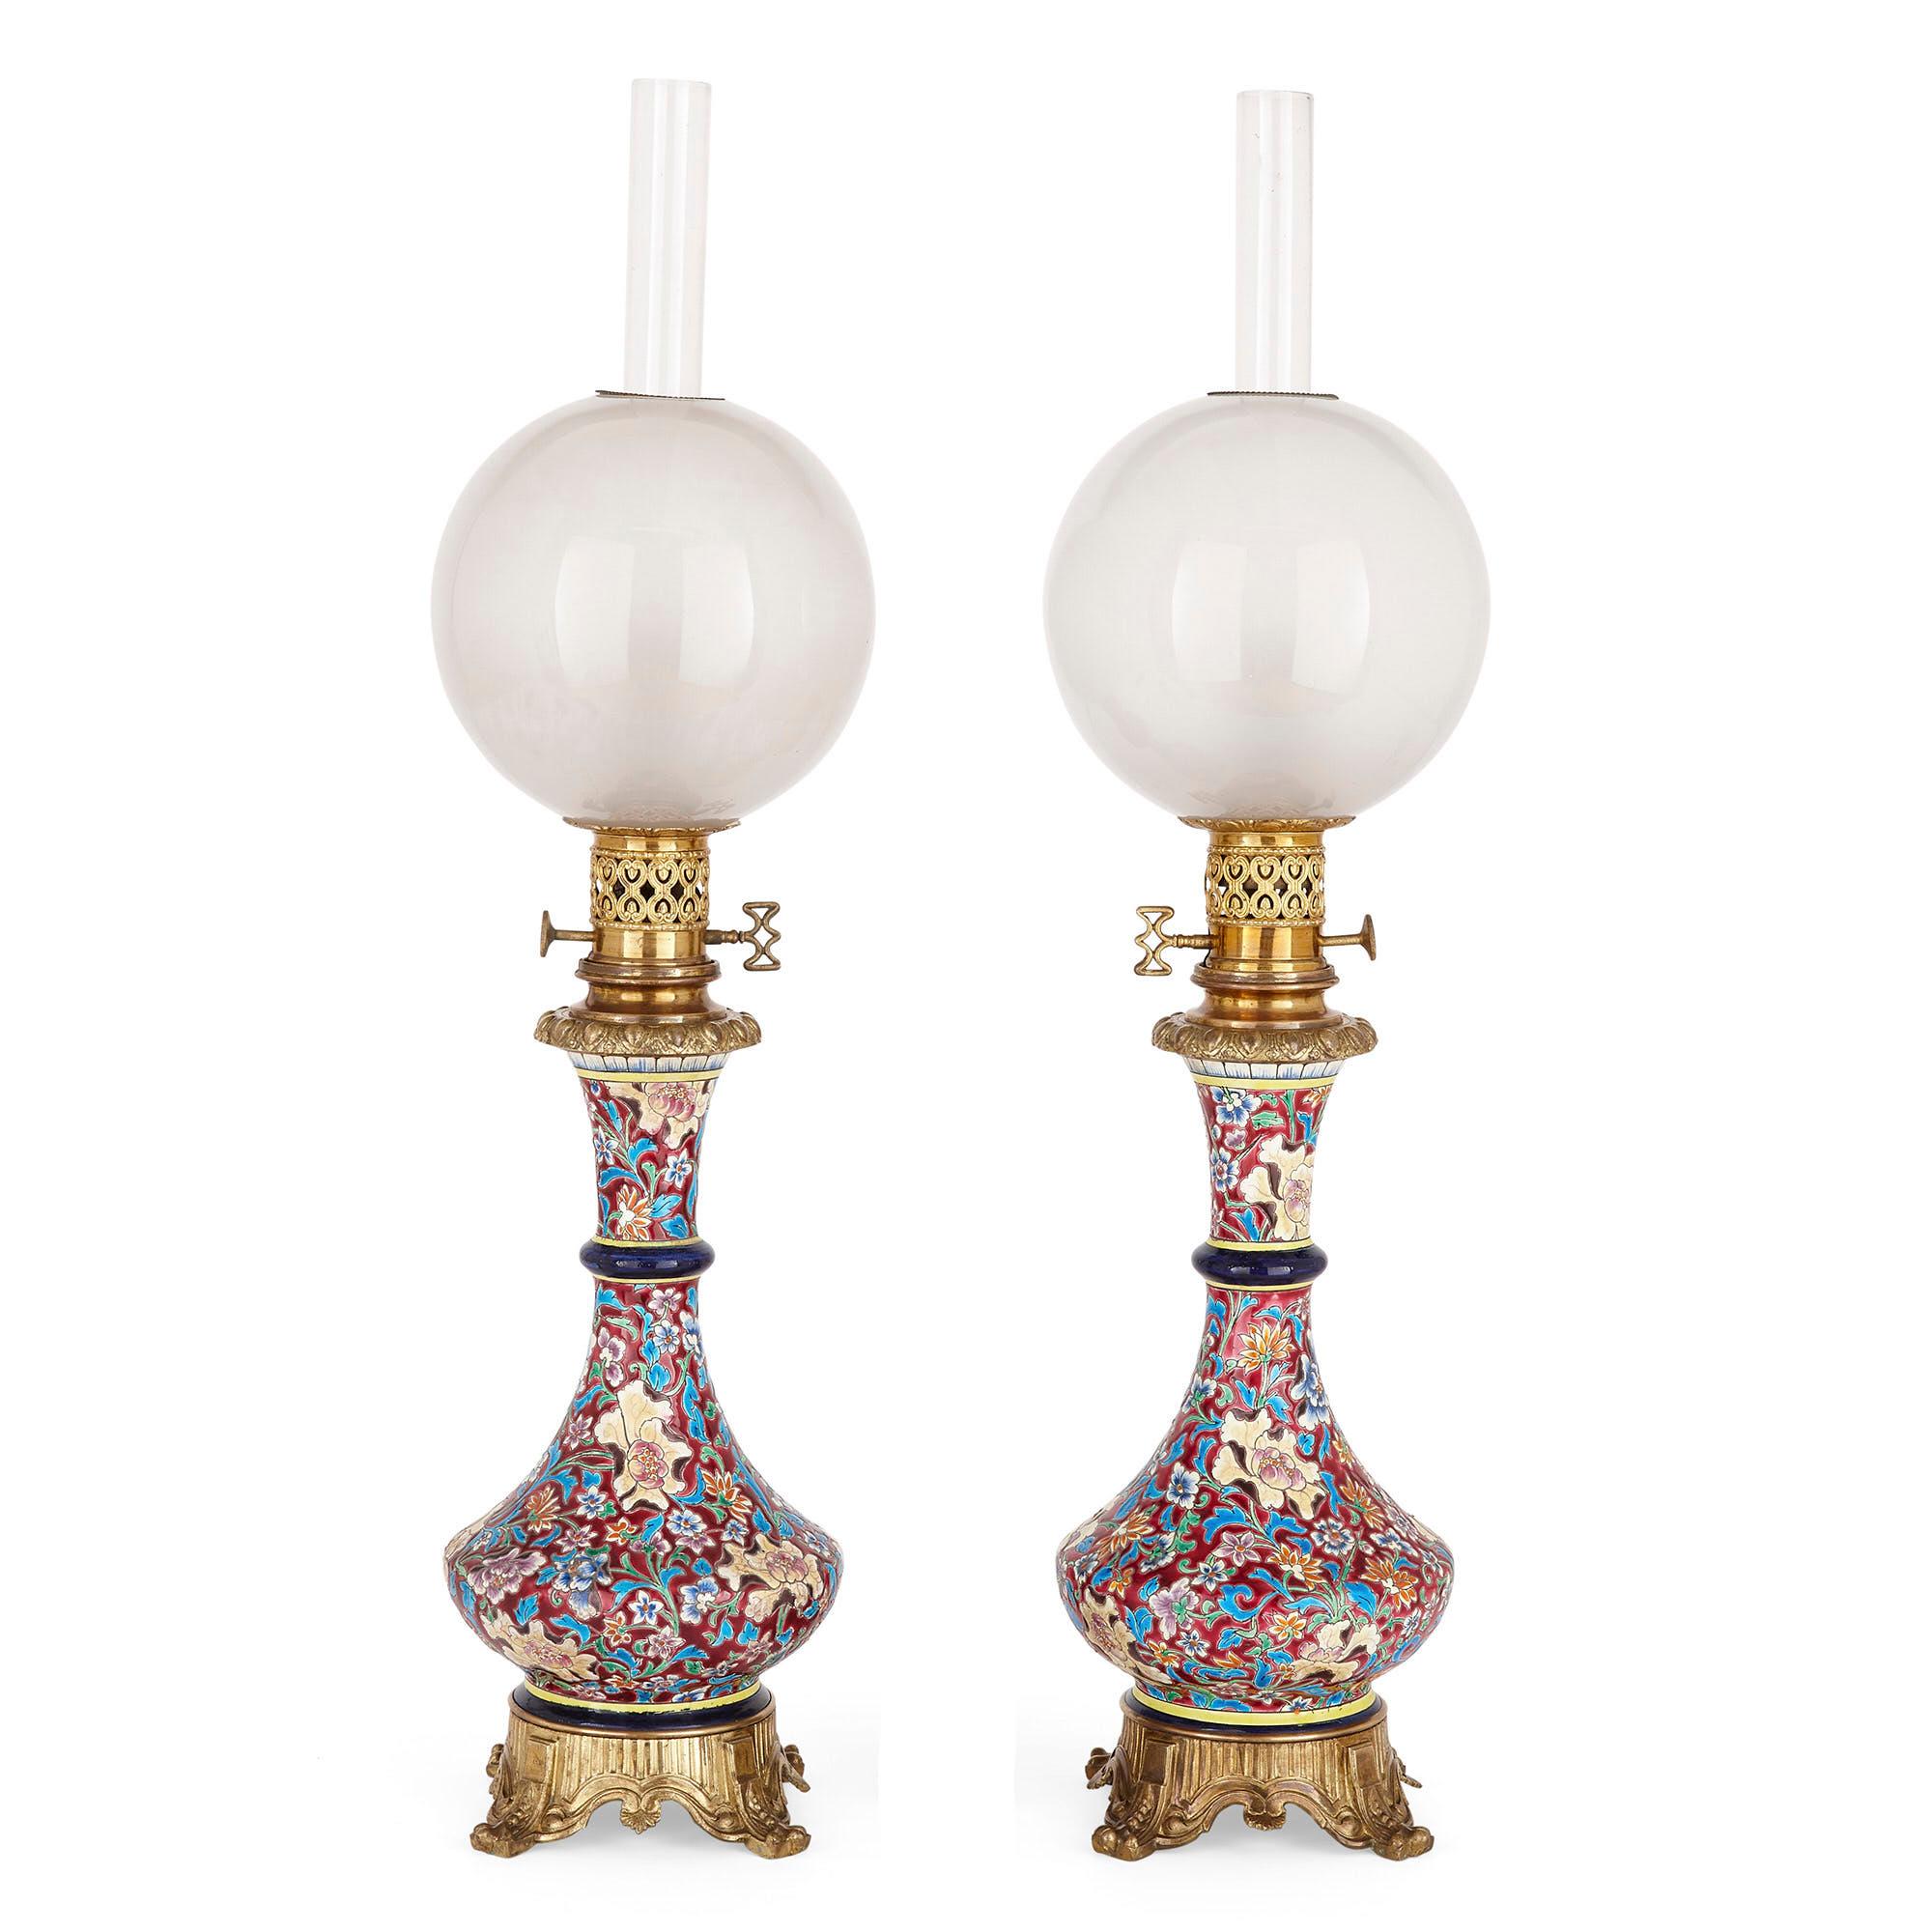 Pair of French Chinoiserie style faience, glass, and gilt bronze lamps
French, late 19th century
Measures: Height 75cm, diameter 18cm

Each lamp in this pair is wrought from exquisite faience (attributed to Longwy), gilt bronze, and fine crystal